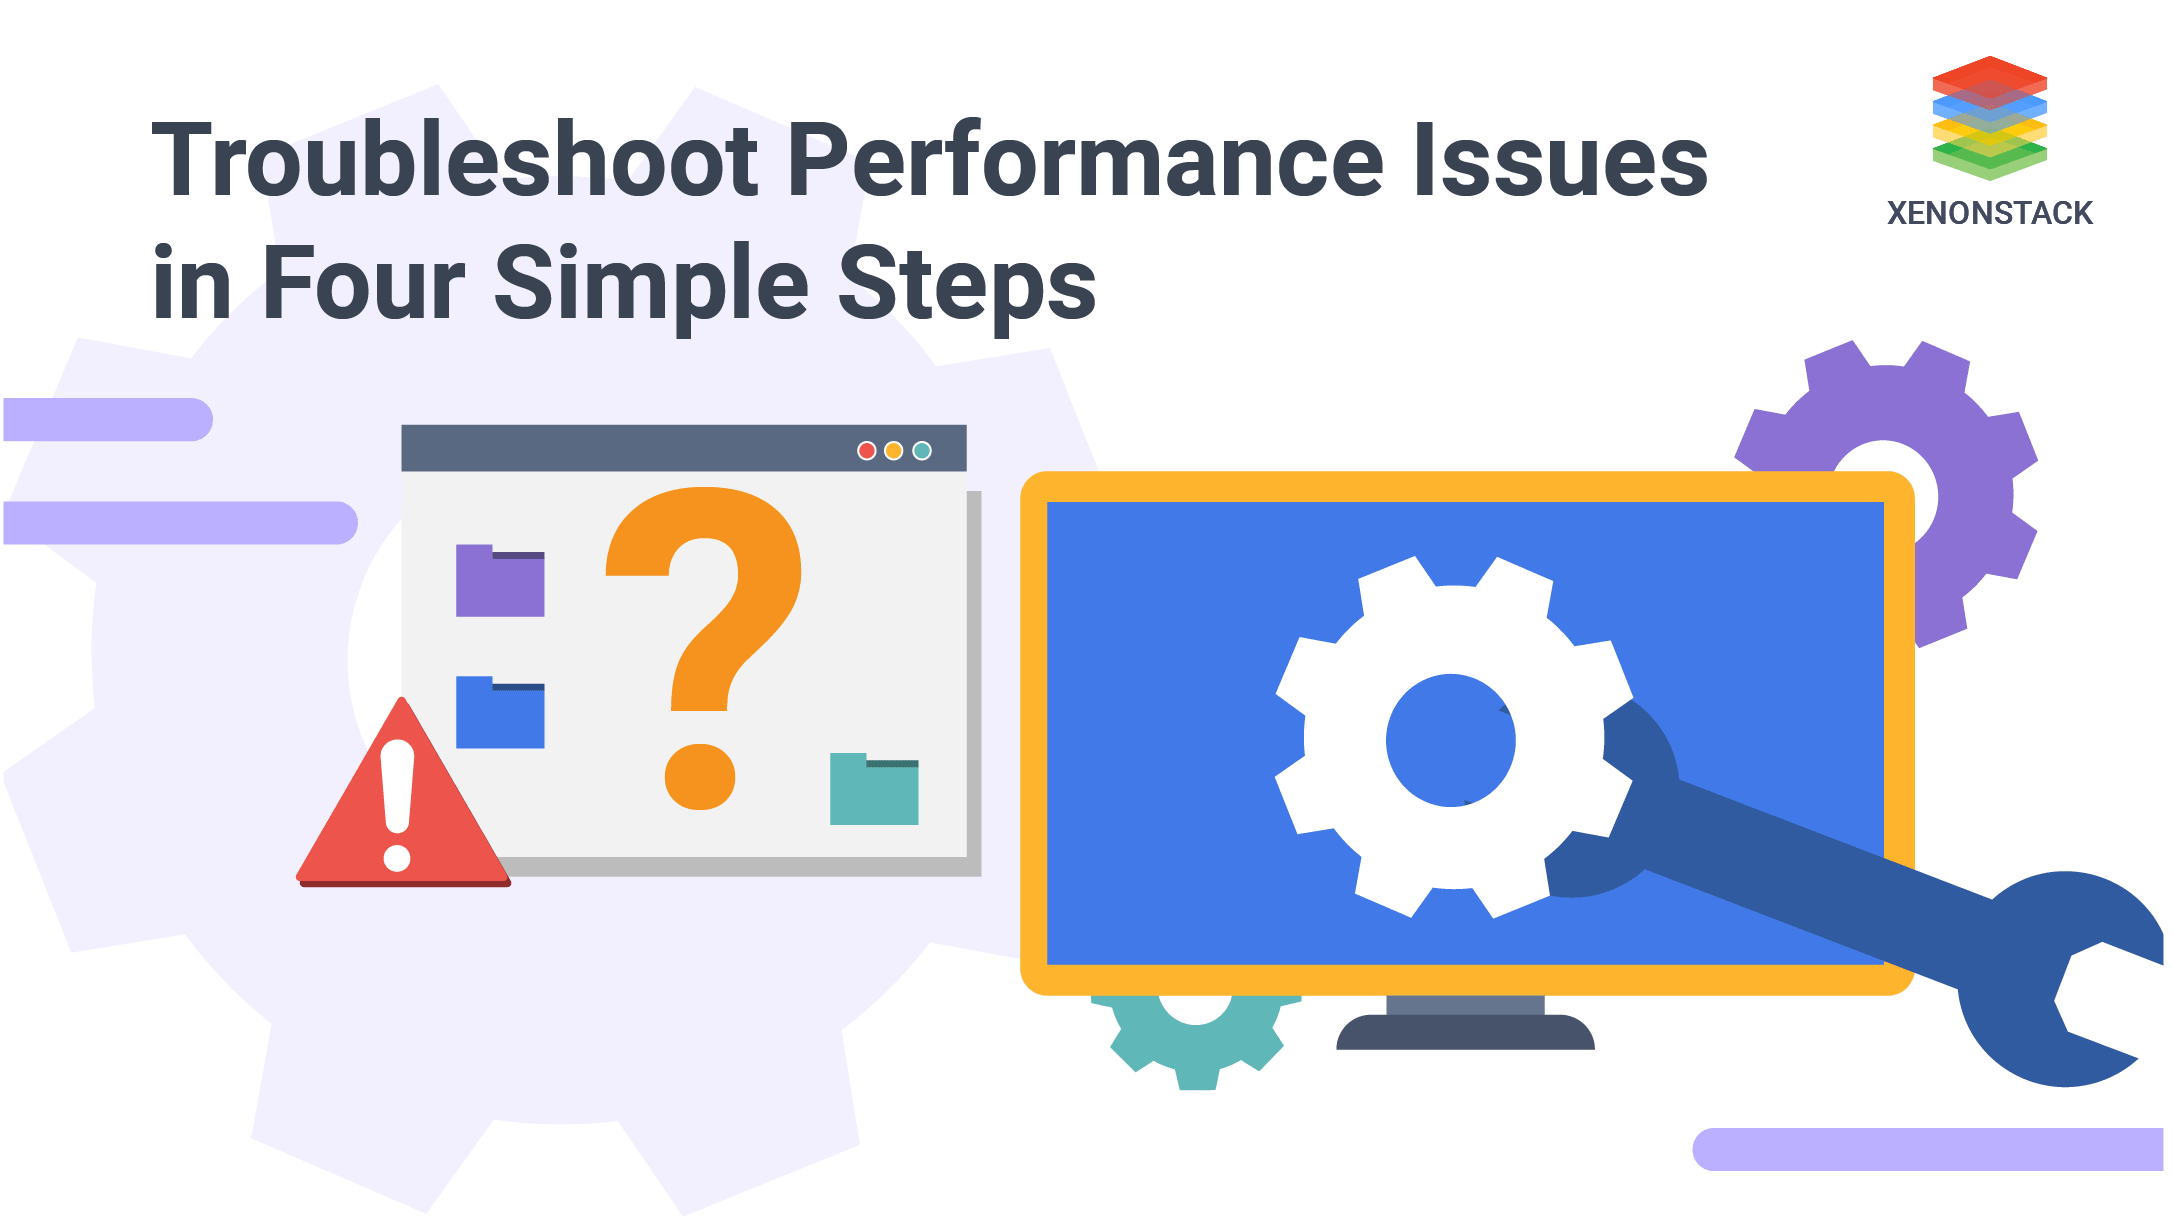 Troubleshoot Performance Issues in Four Simple Steps